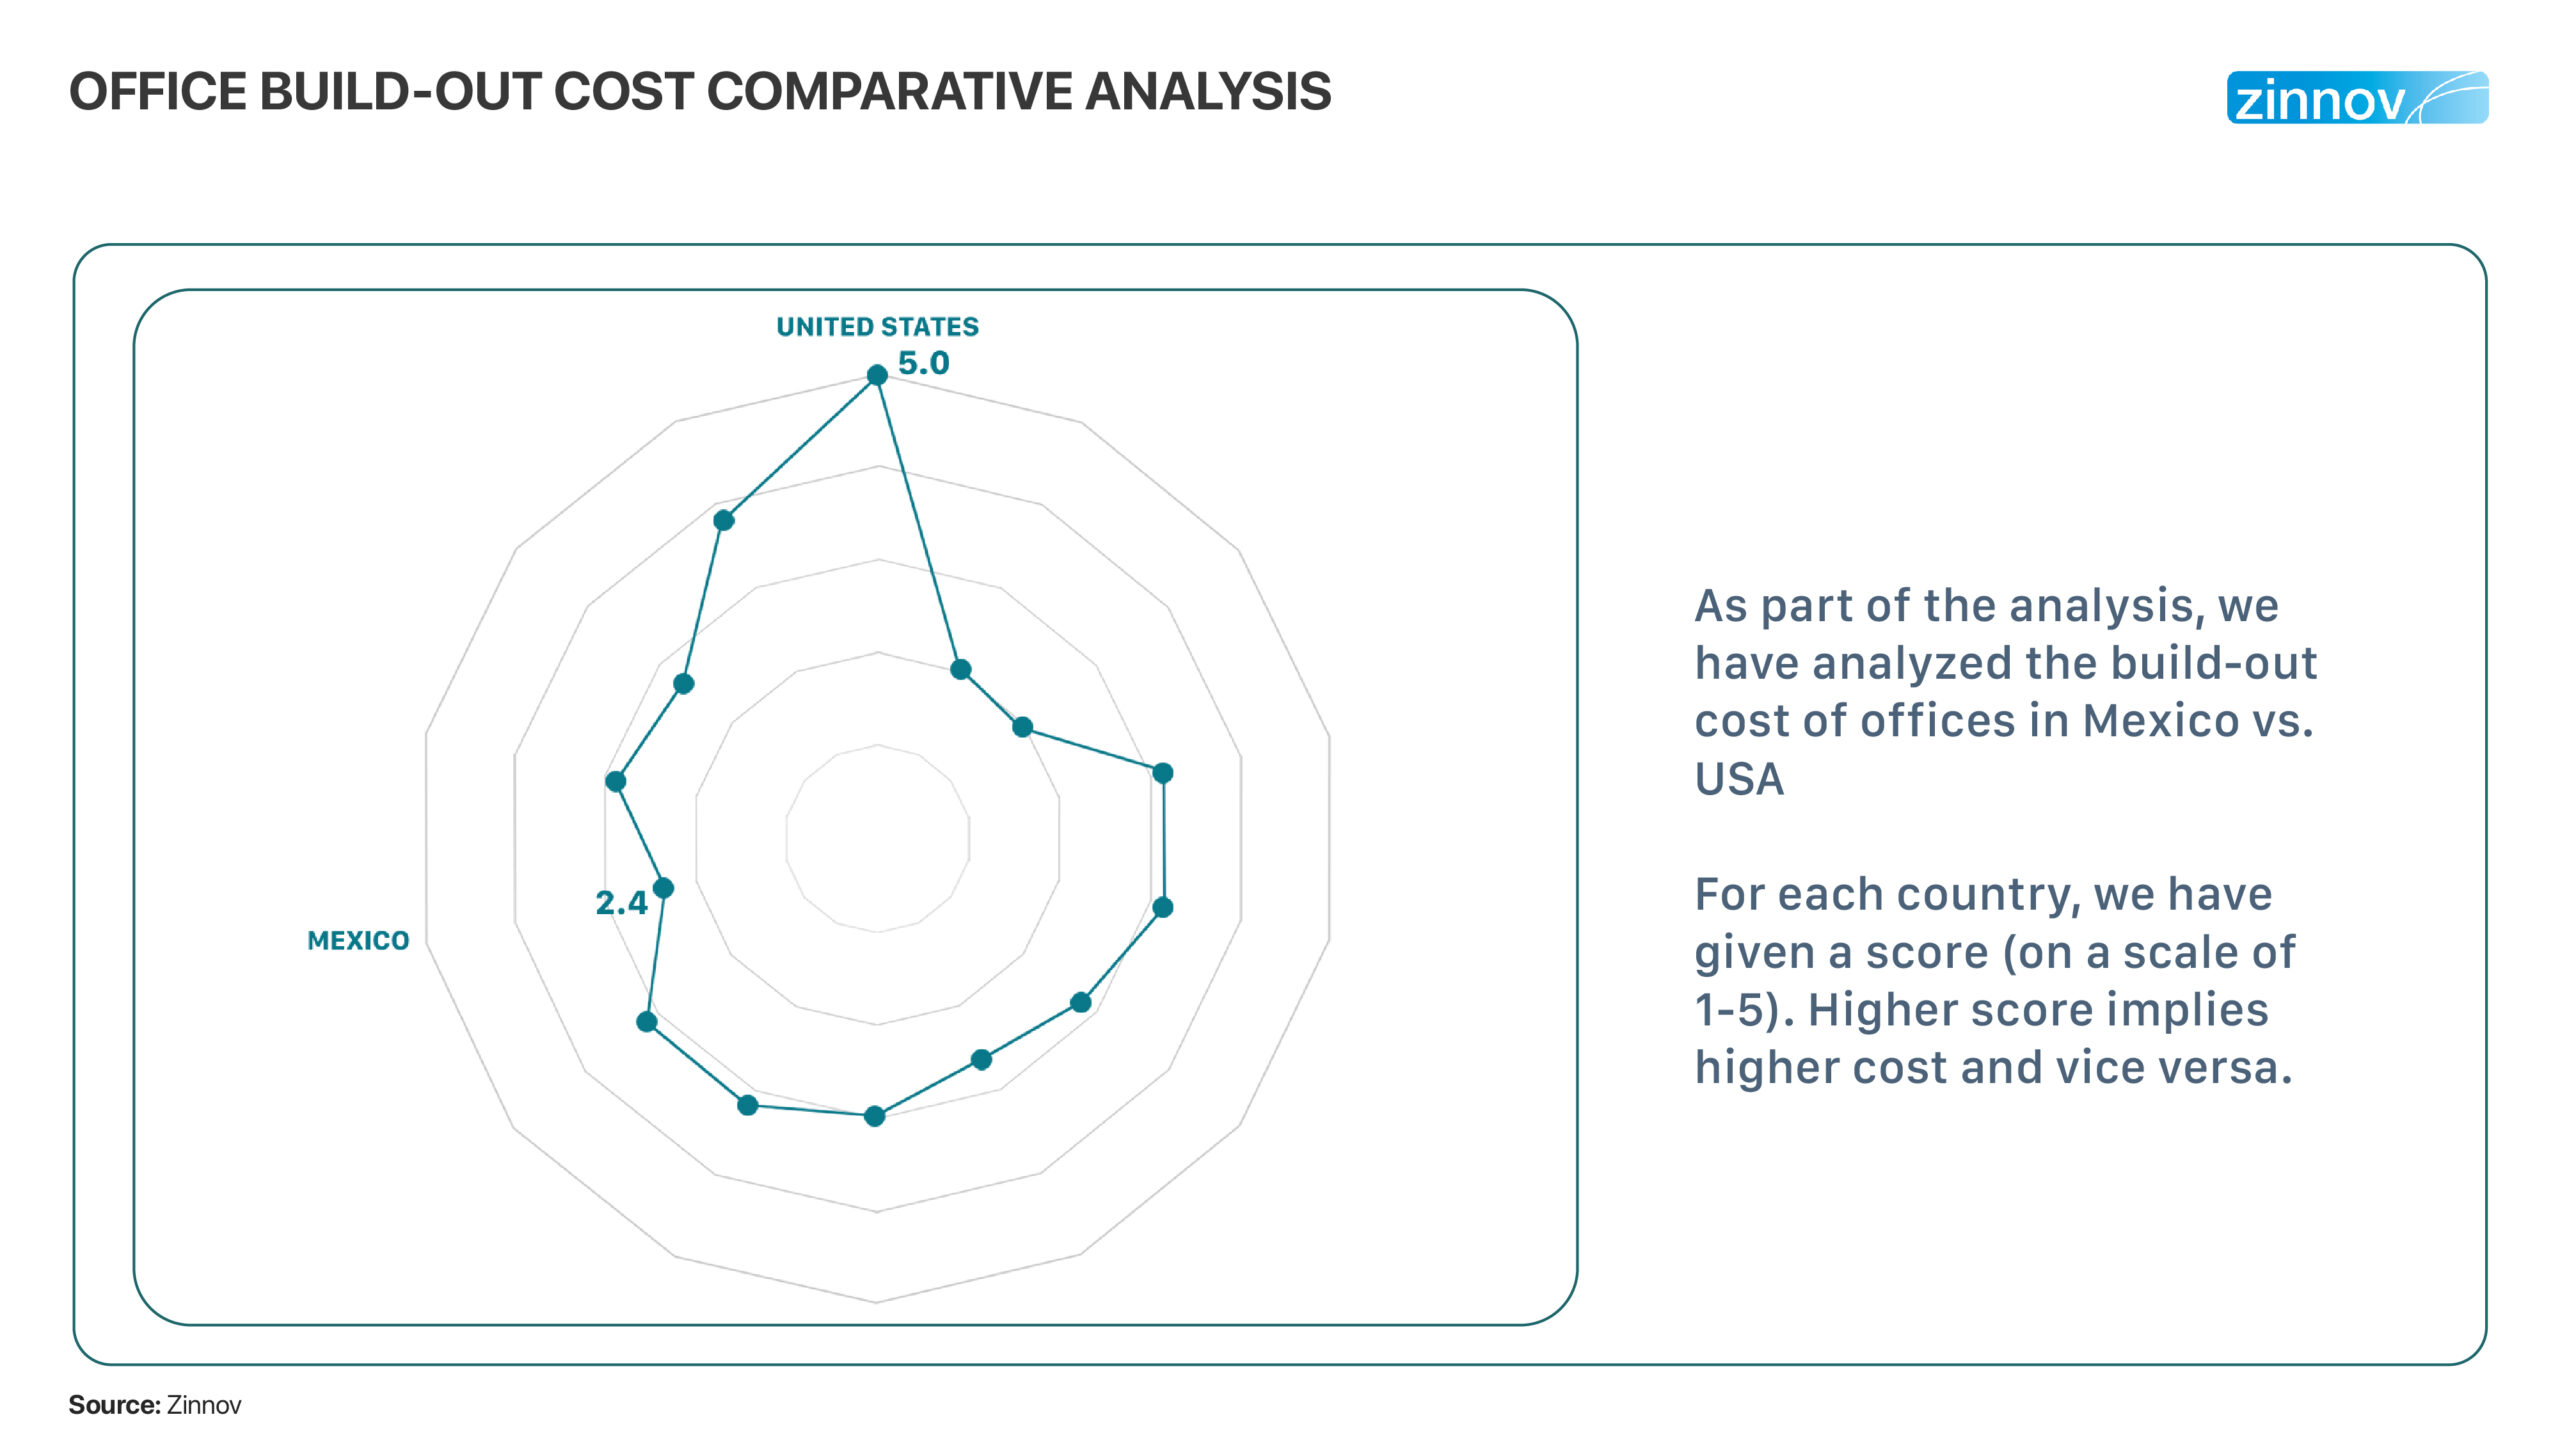 Office build-out cost comparative analysis